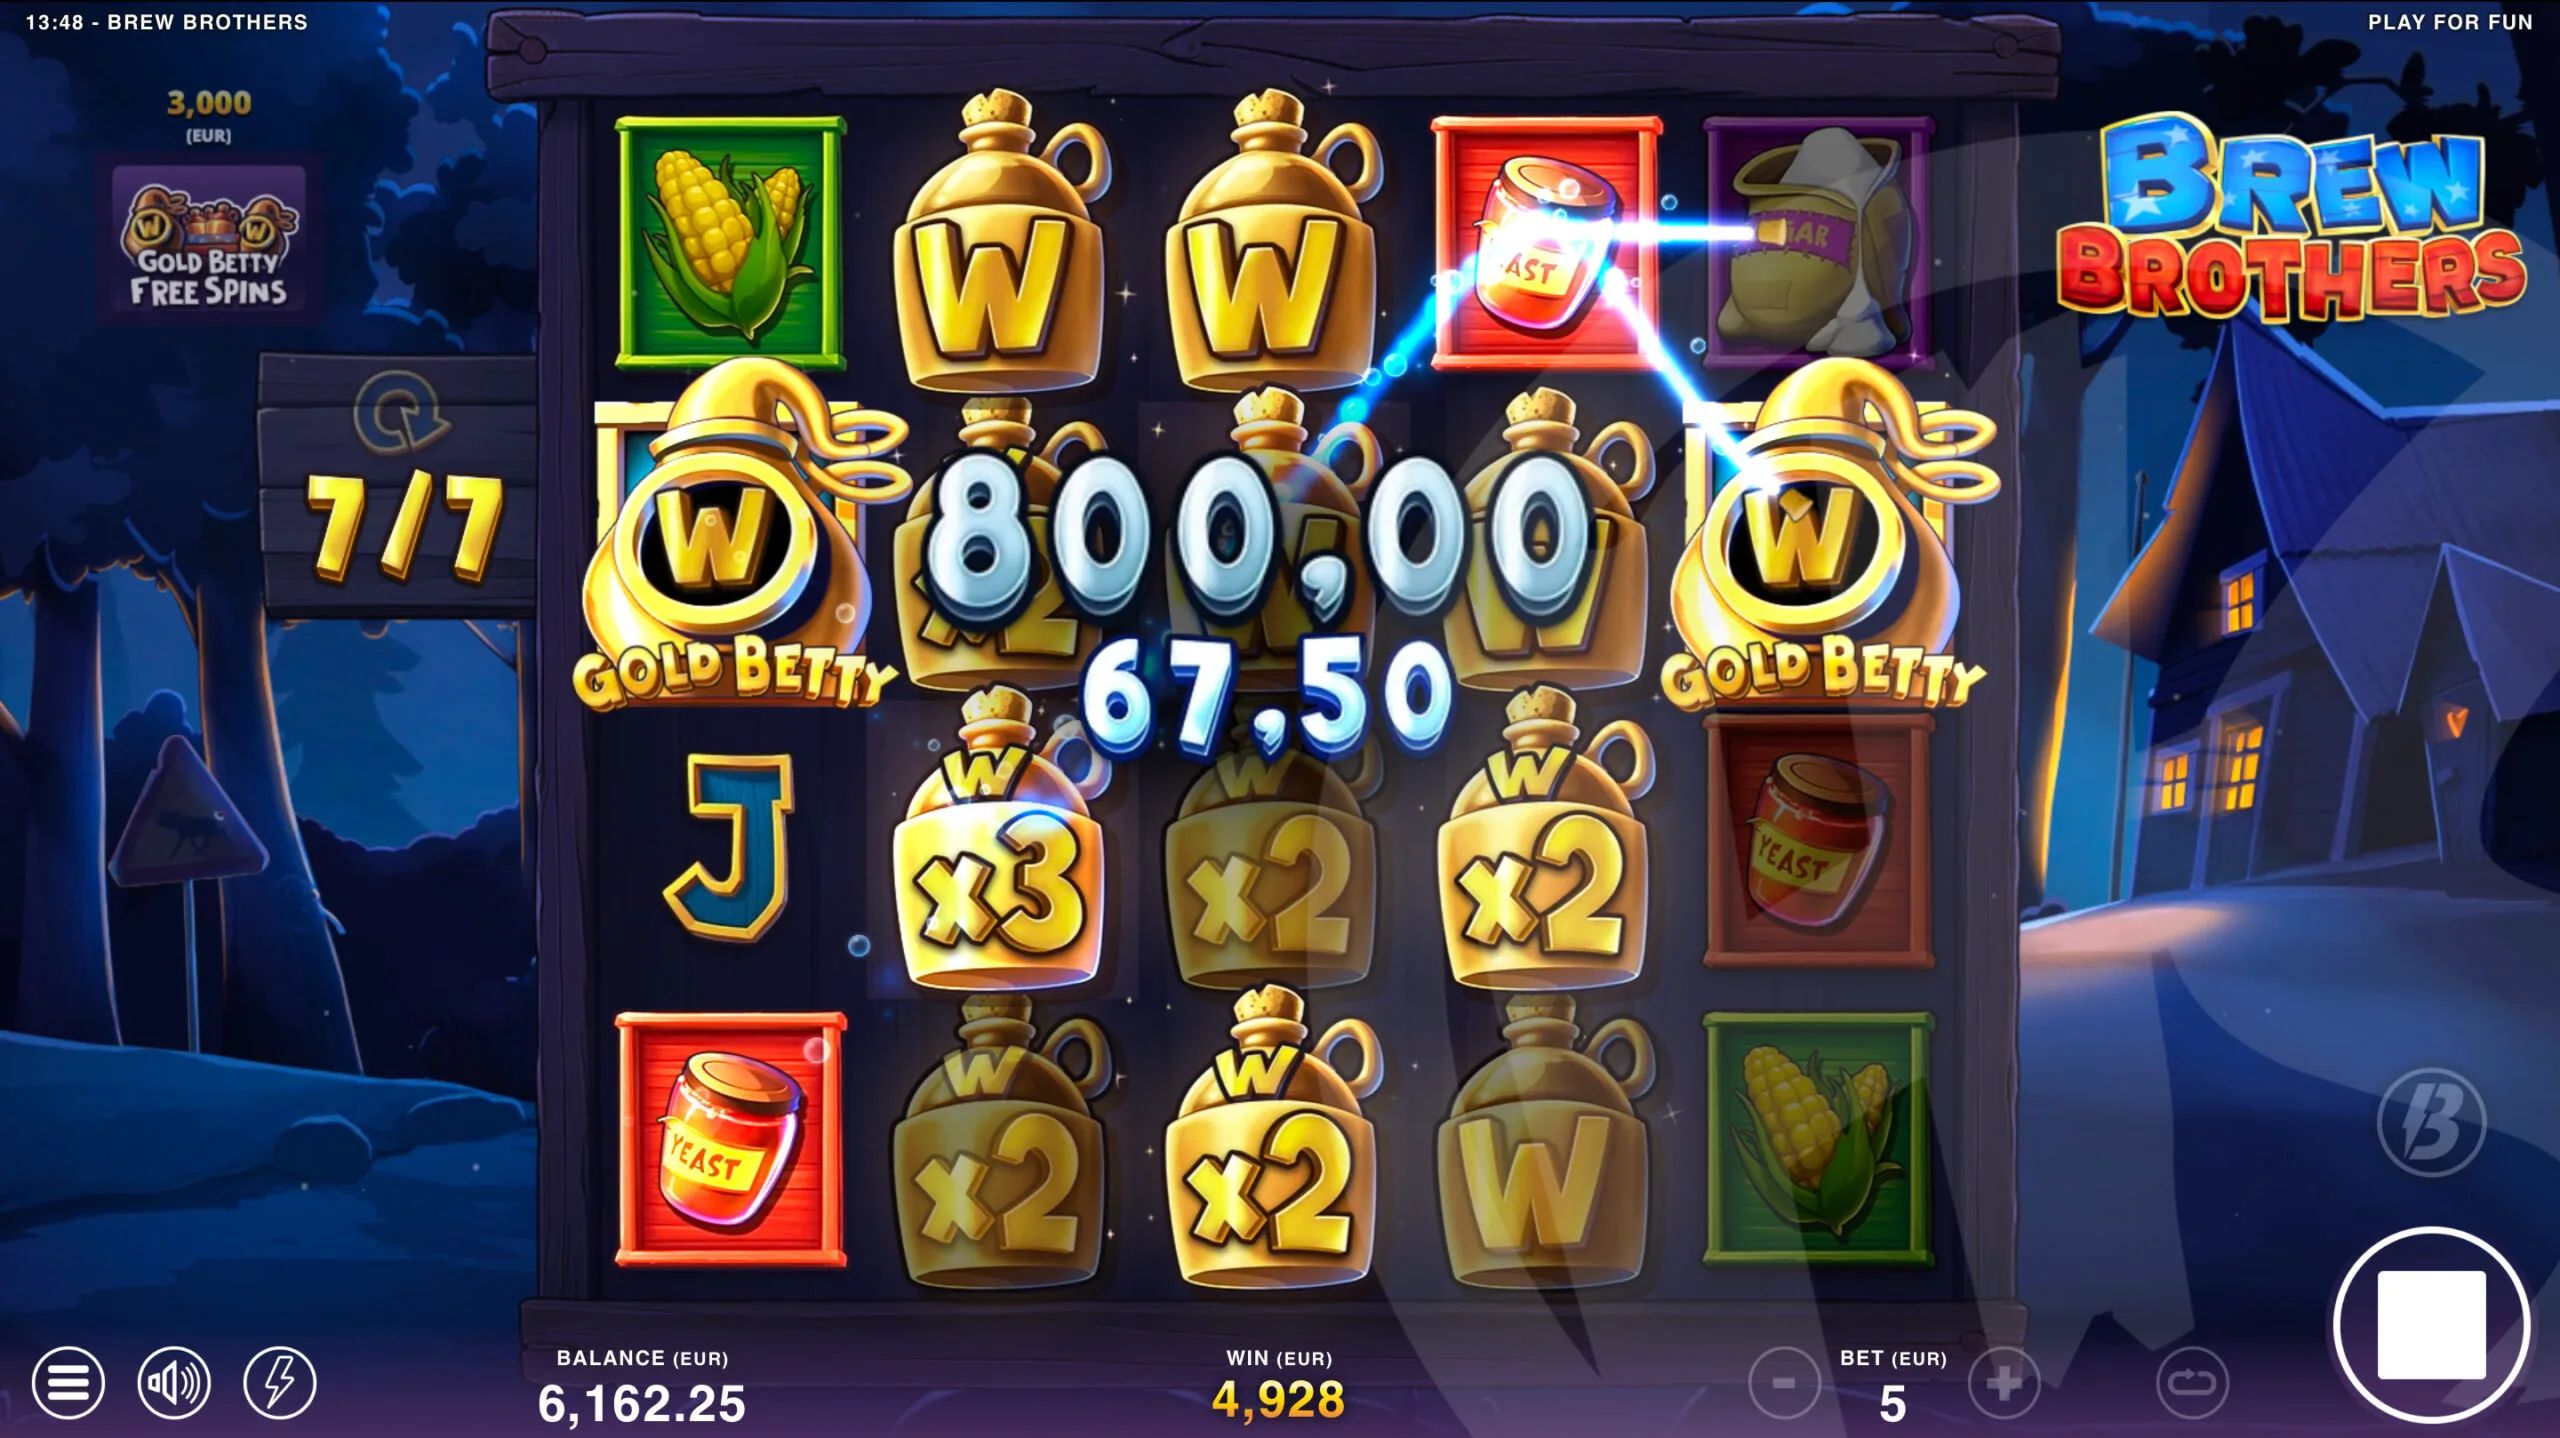 Brew Brothers Free Spins Bonus with two Gold Betty Symbols